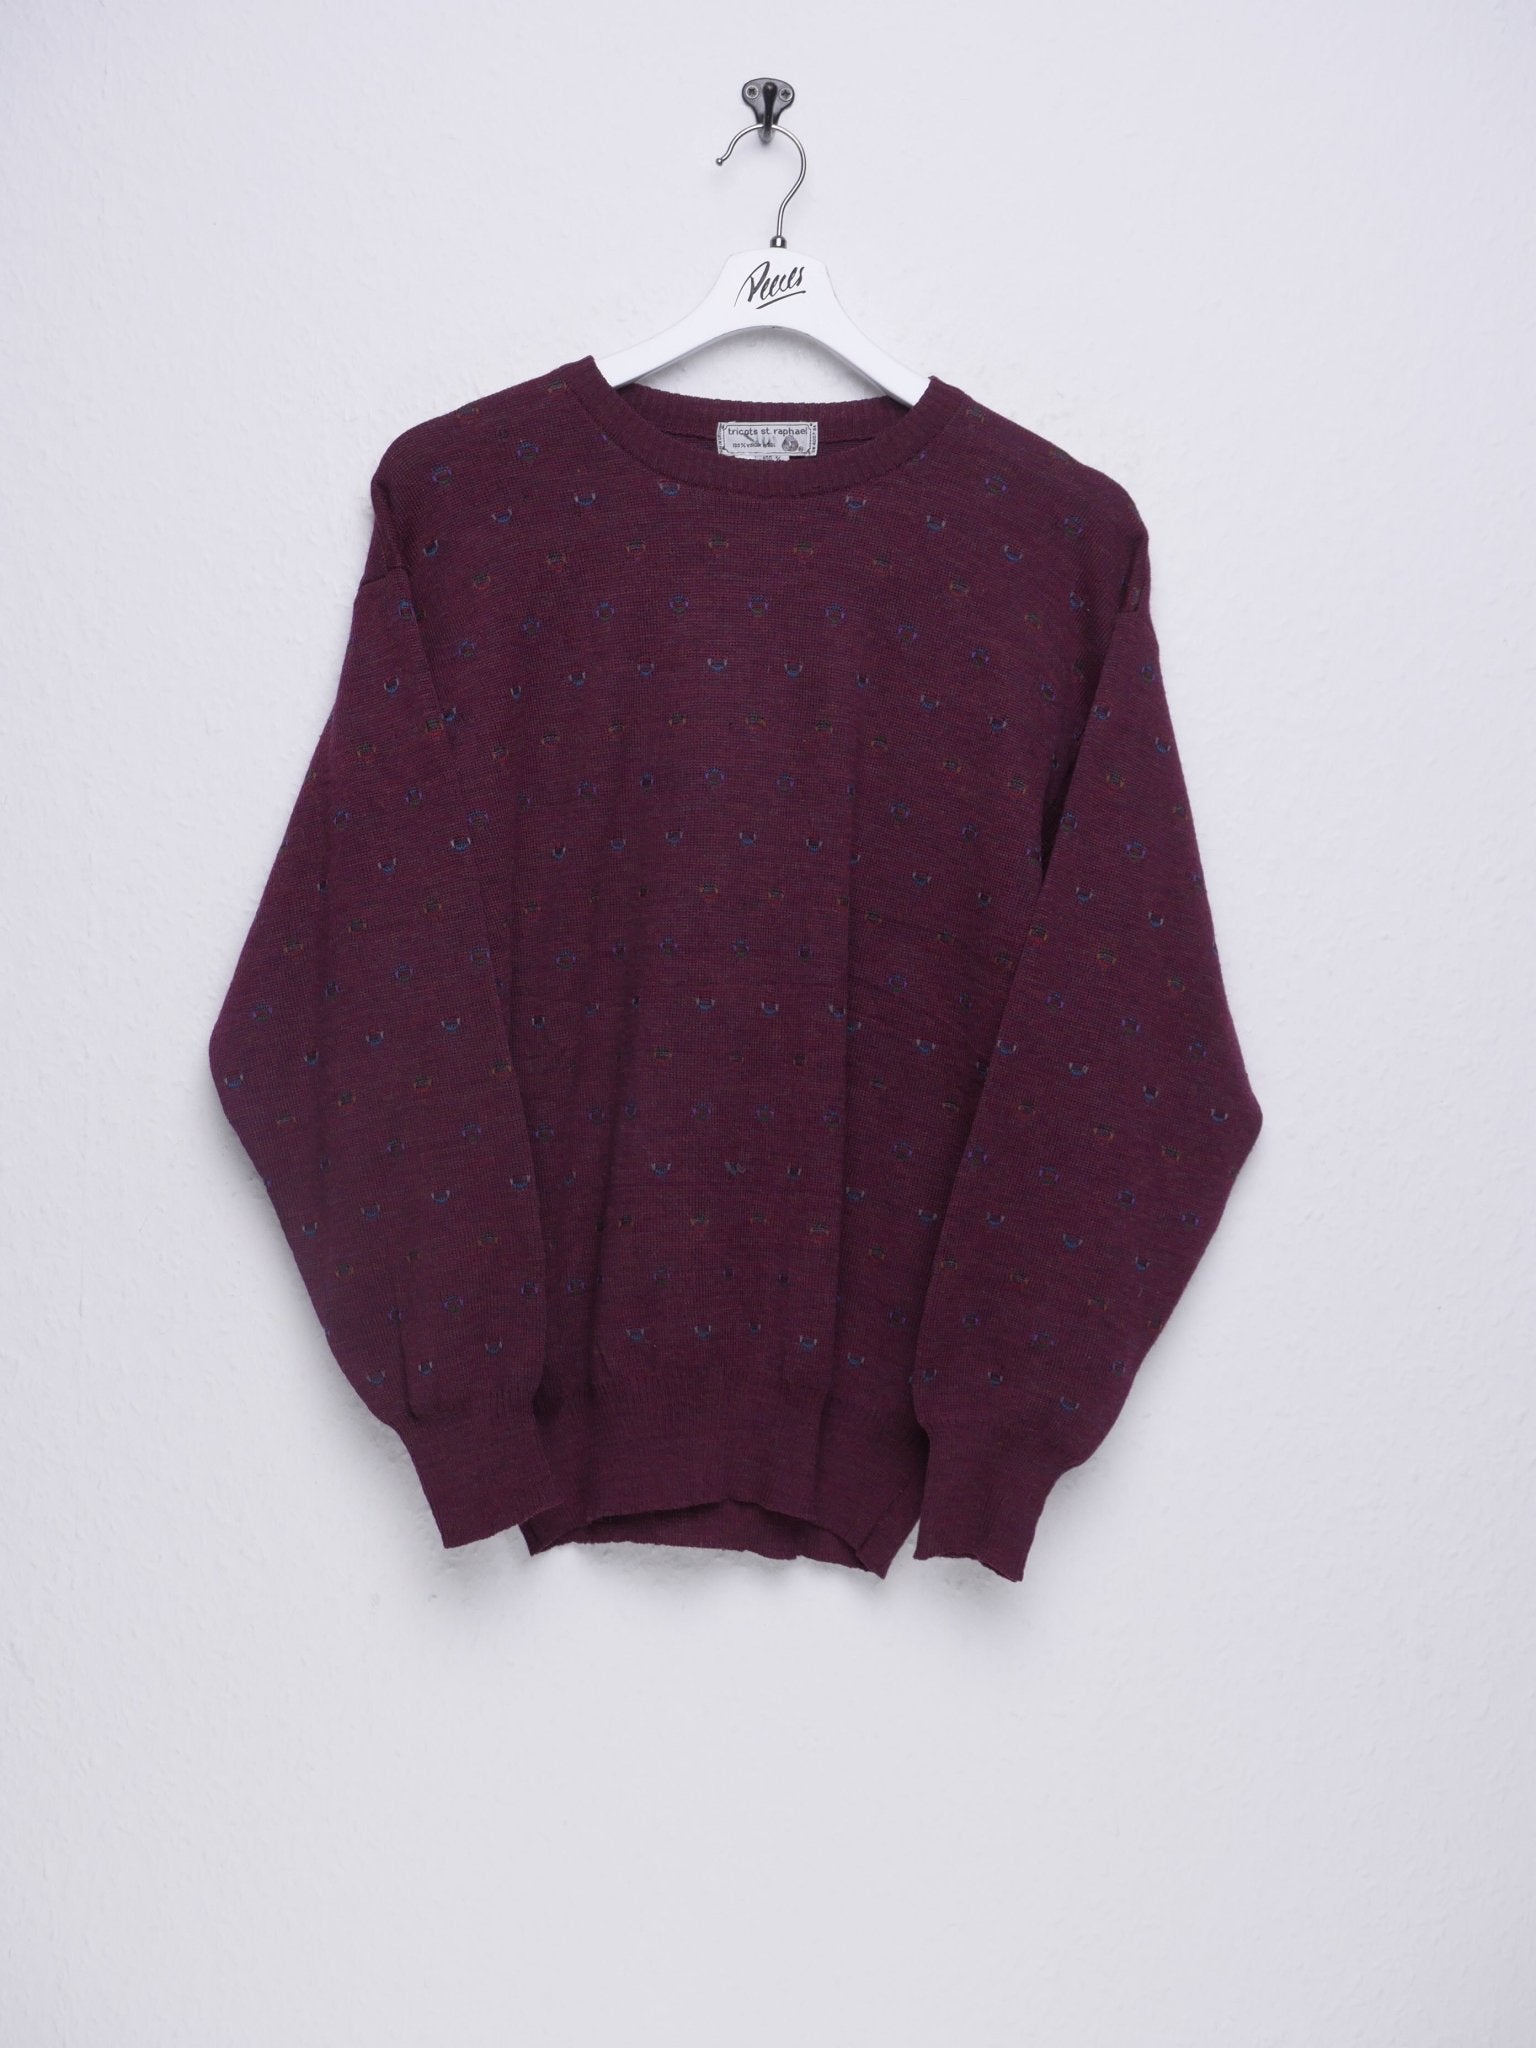 Vintage knitted patterned burgundy Wool Sweater - Peeces